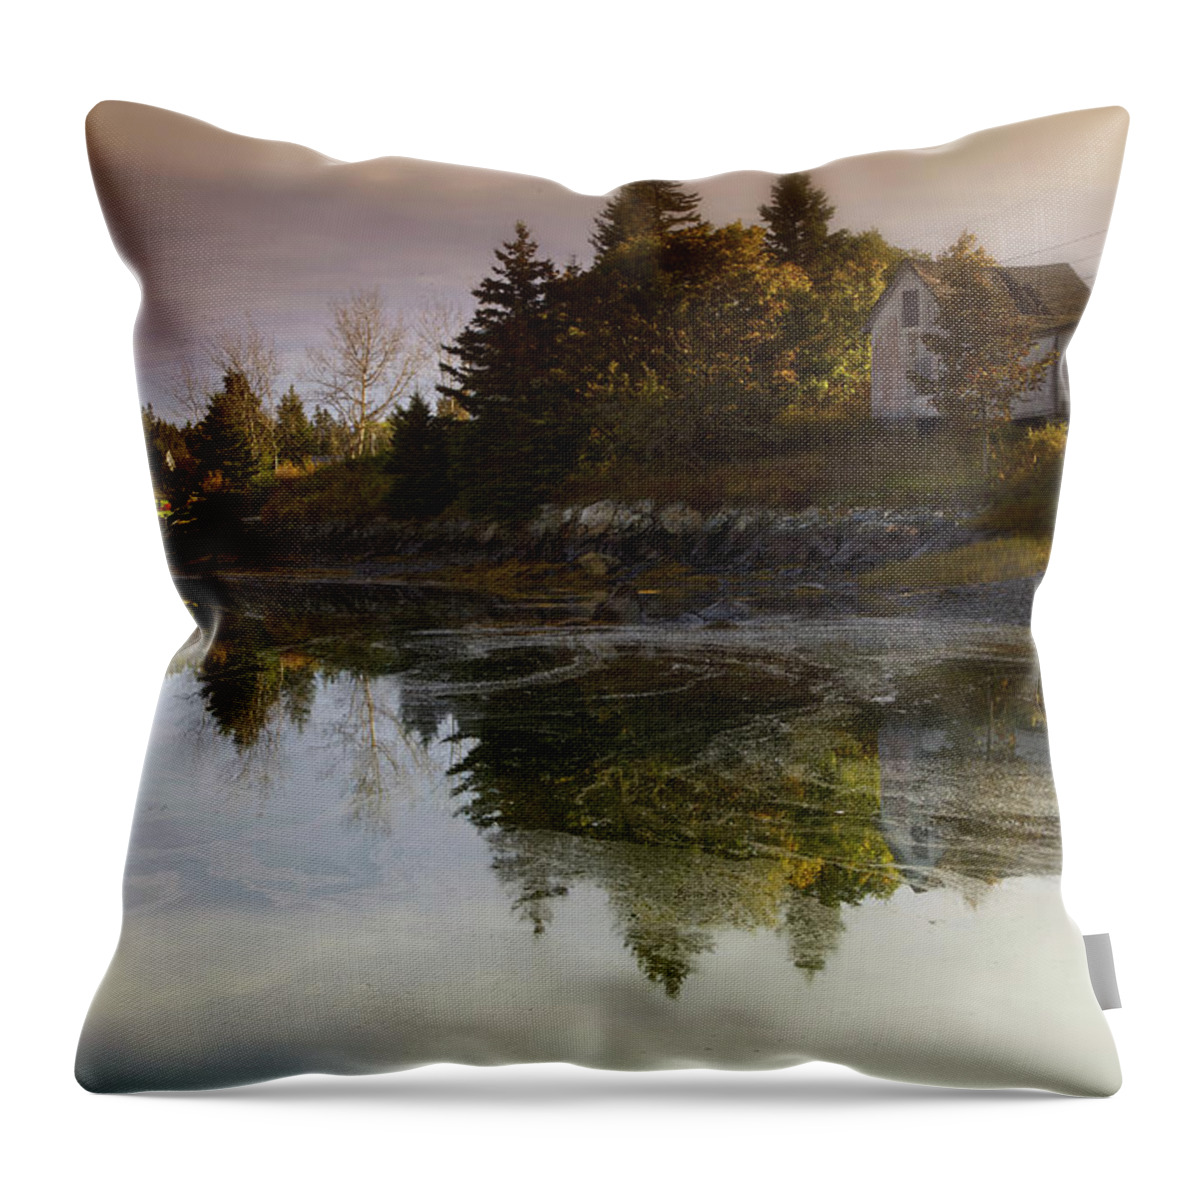 Fall Colors Throw Pillow featuring the photograph Peaceful Morning by Alberto Audisio